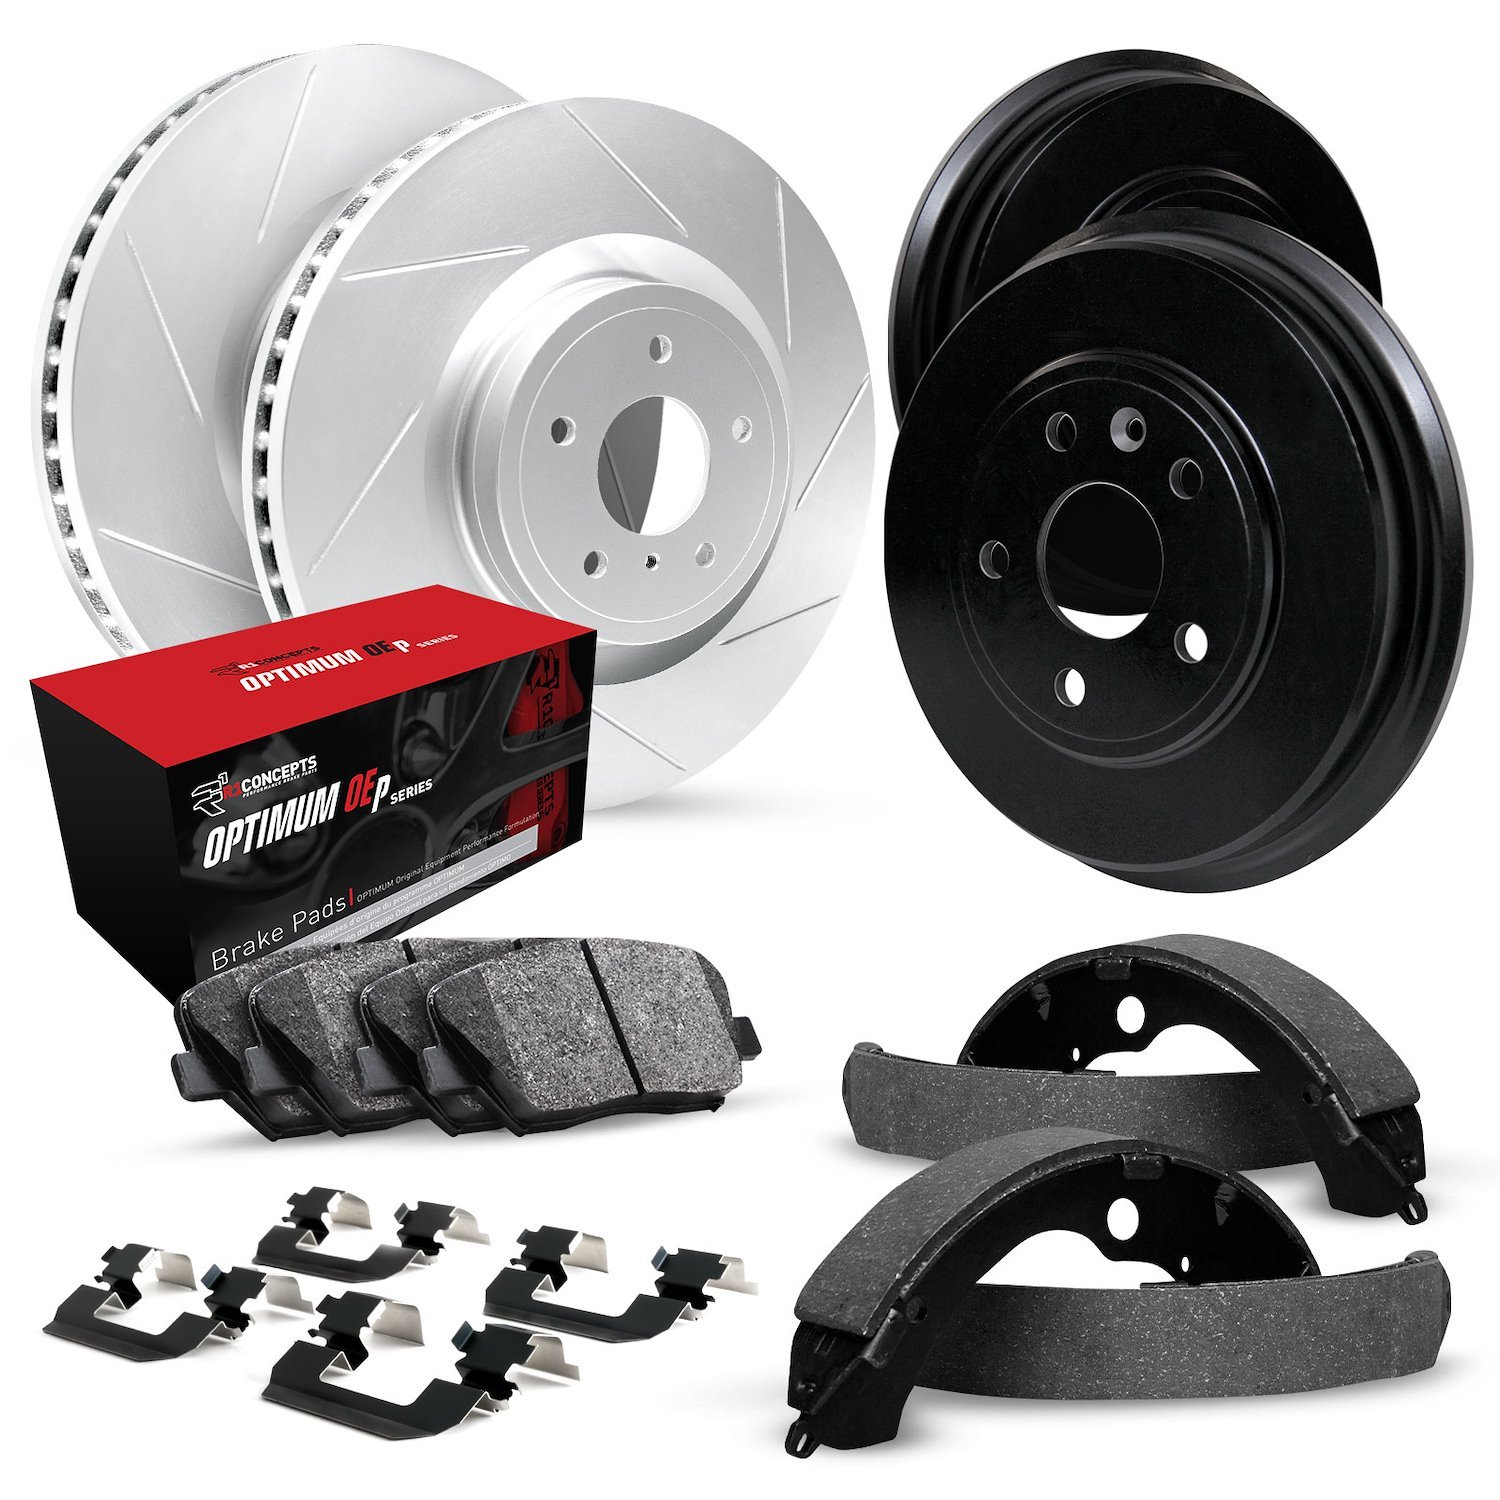 GEO-Carbon Slotted Brake Rotor & Drum Set w/Optimum OE Pads, Shoes, & Hardware, 2000-2004 Ford/Lincoln/Mercury/Mazda